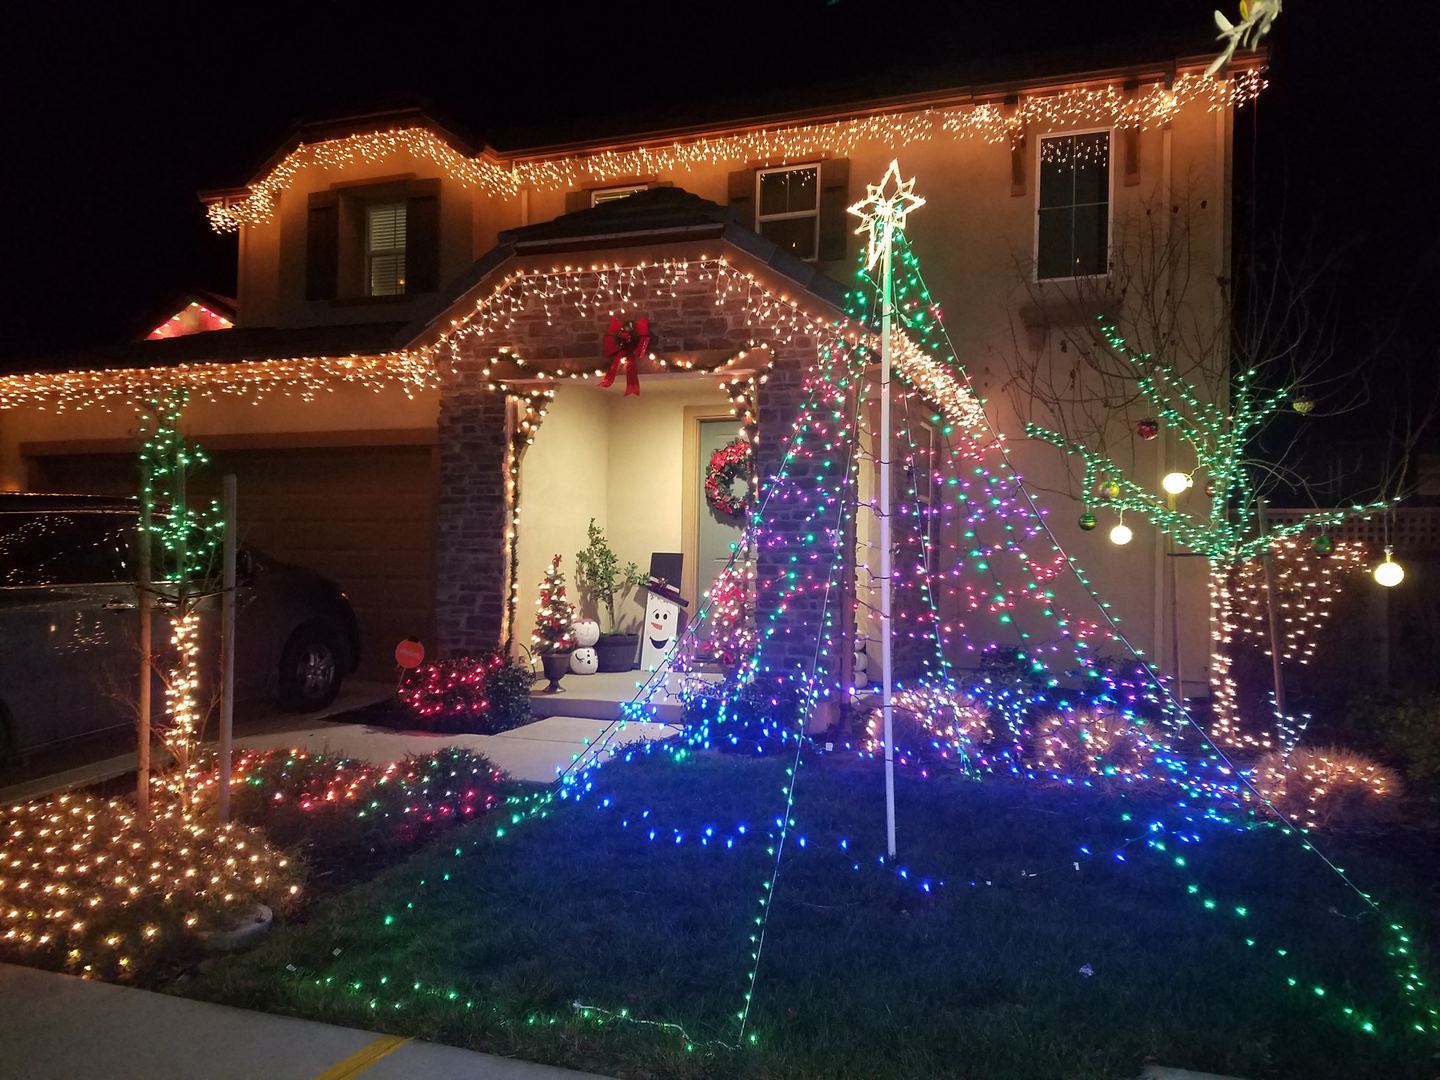 2019 Holiday Lights Contest Starts Thanksgiving Weekend